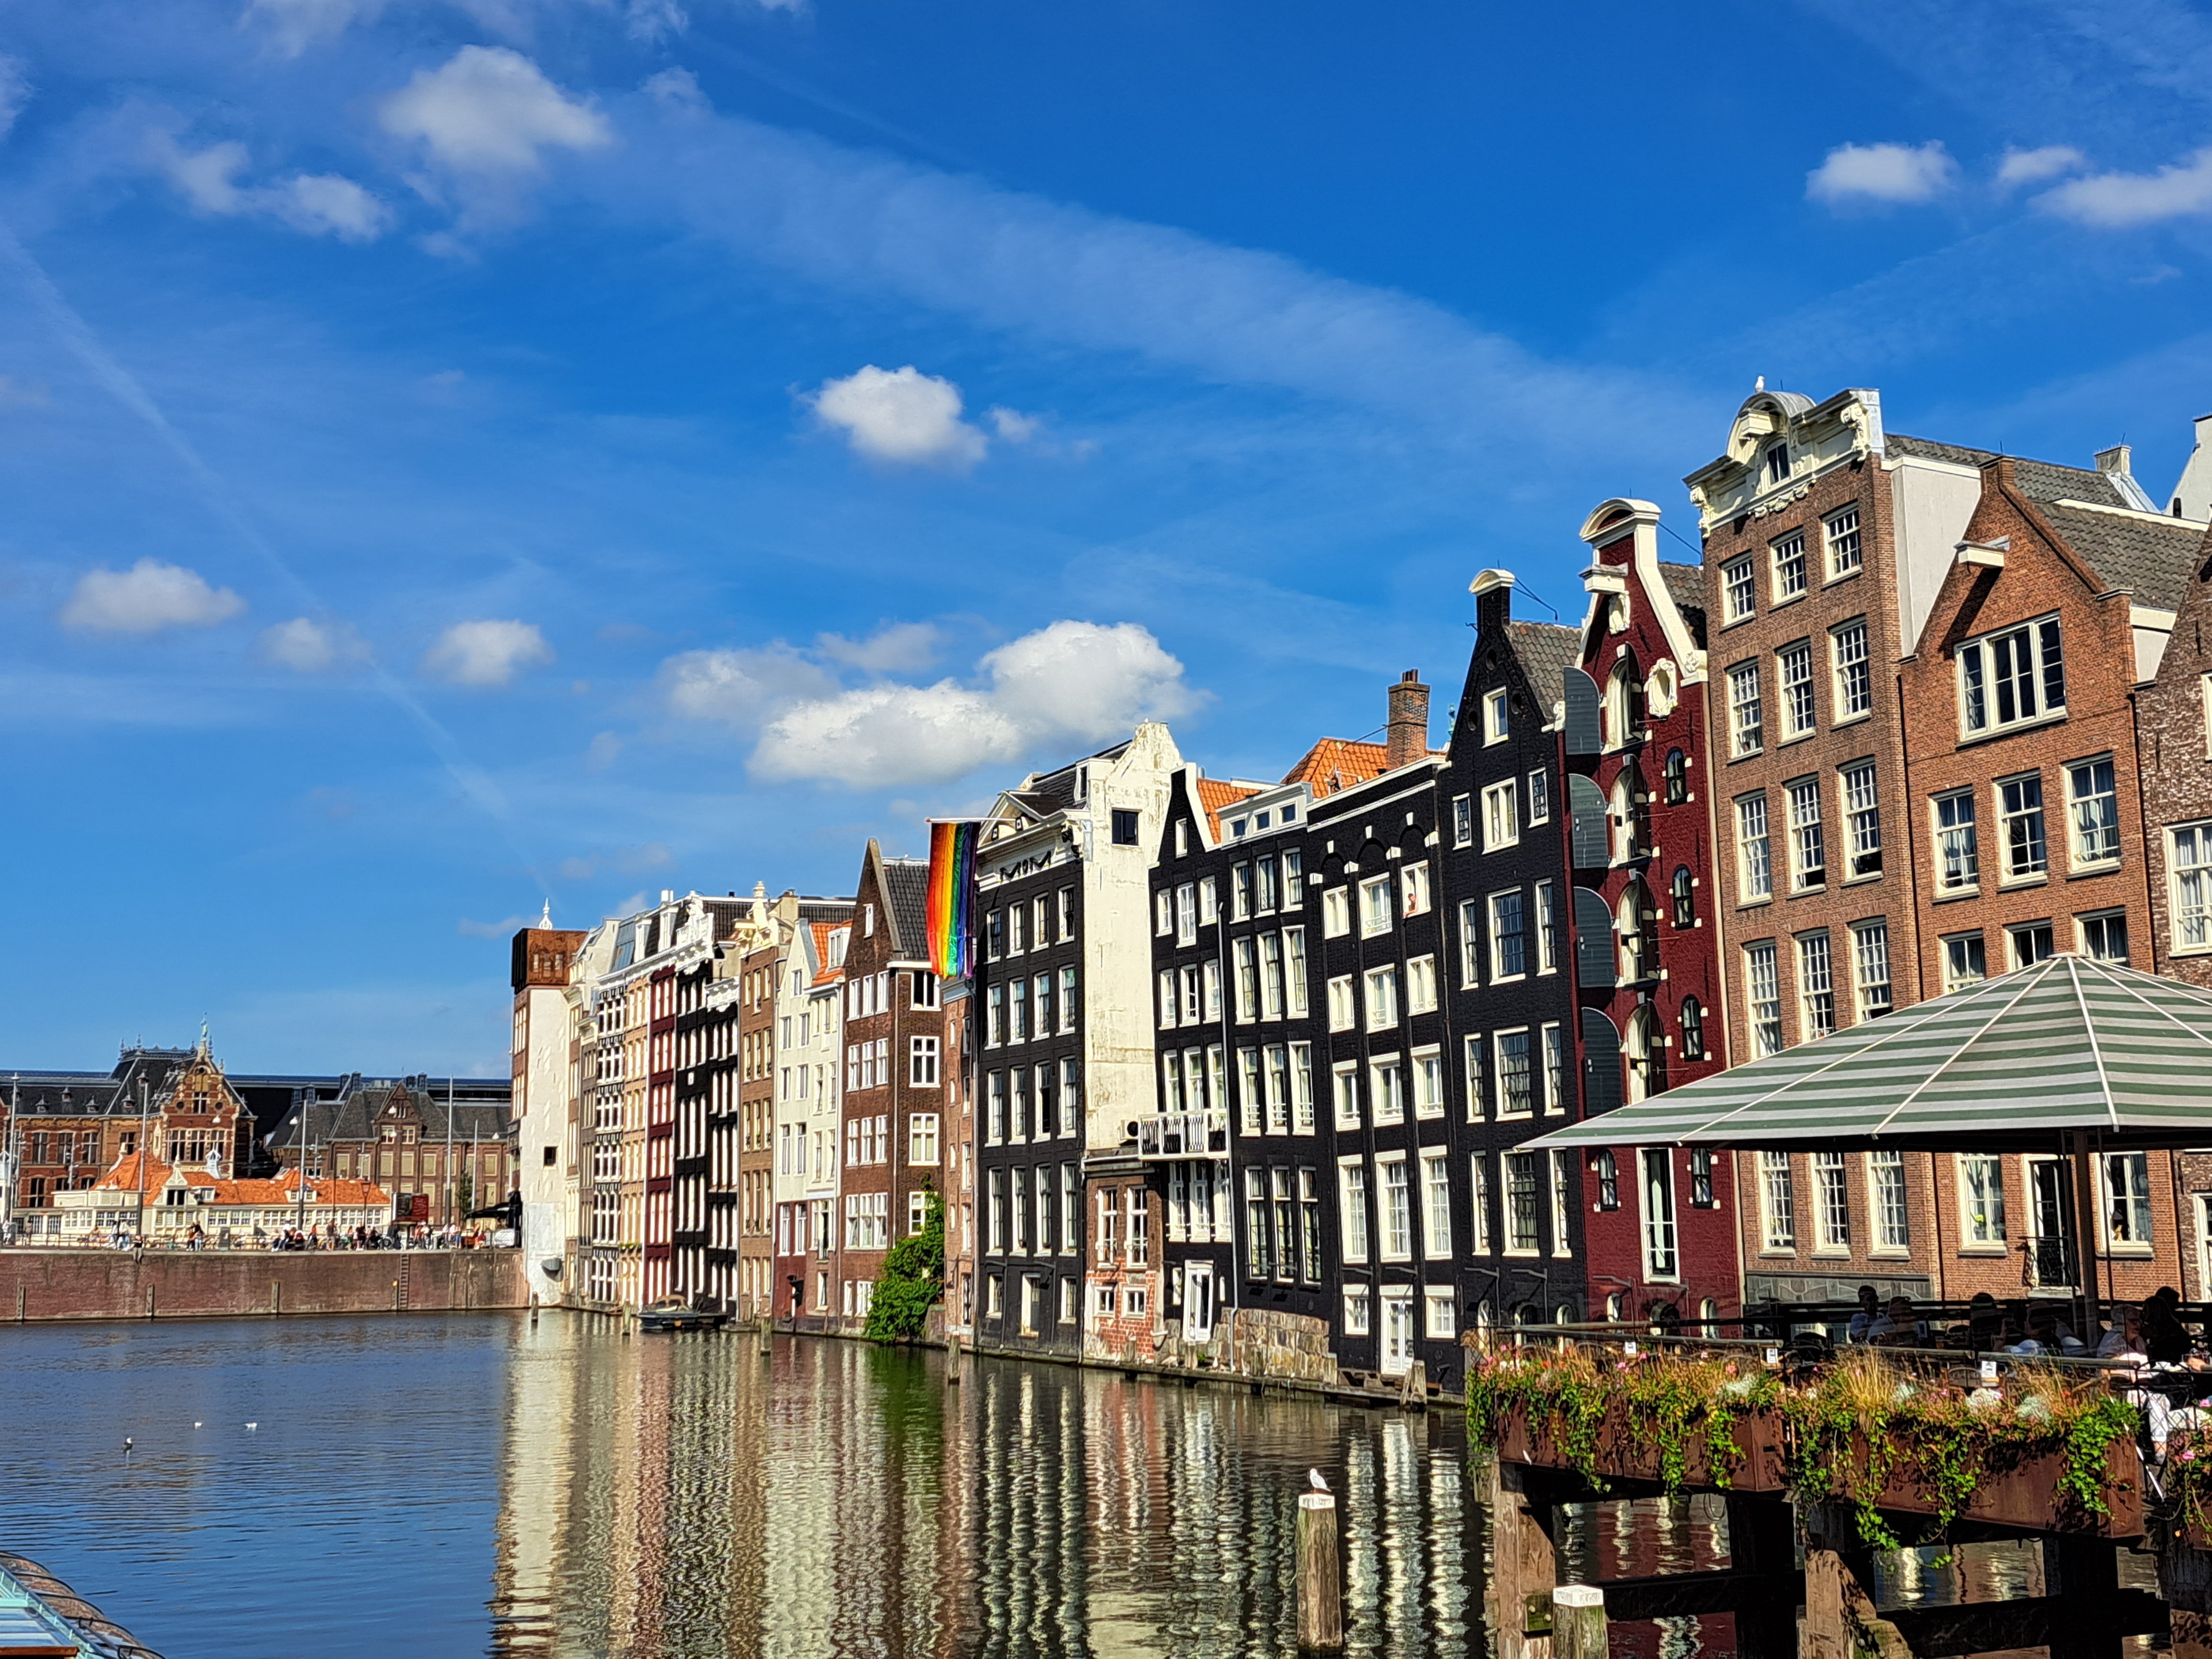 Stay by one of the city’s iconic canals